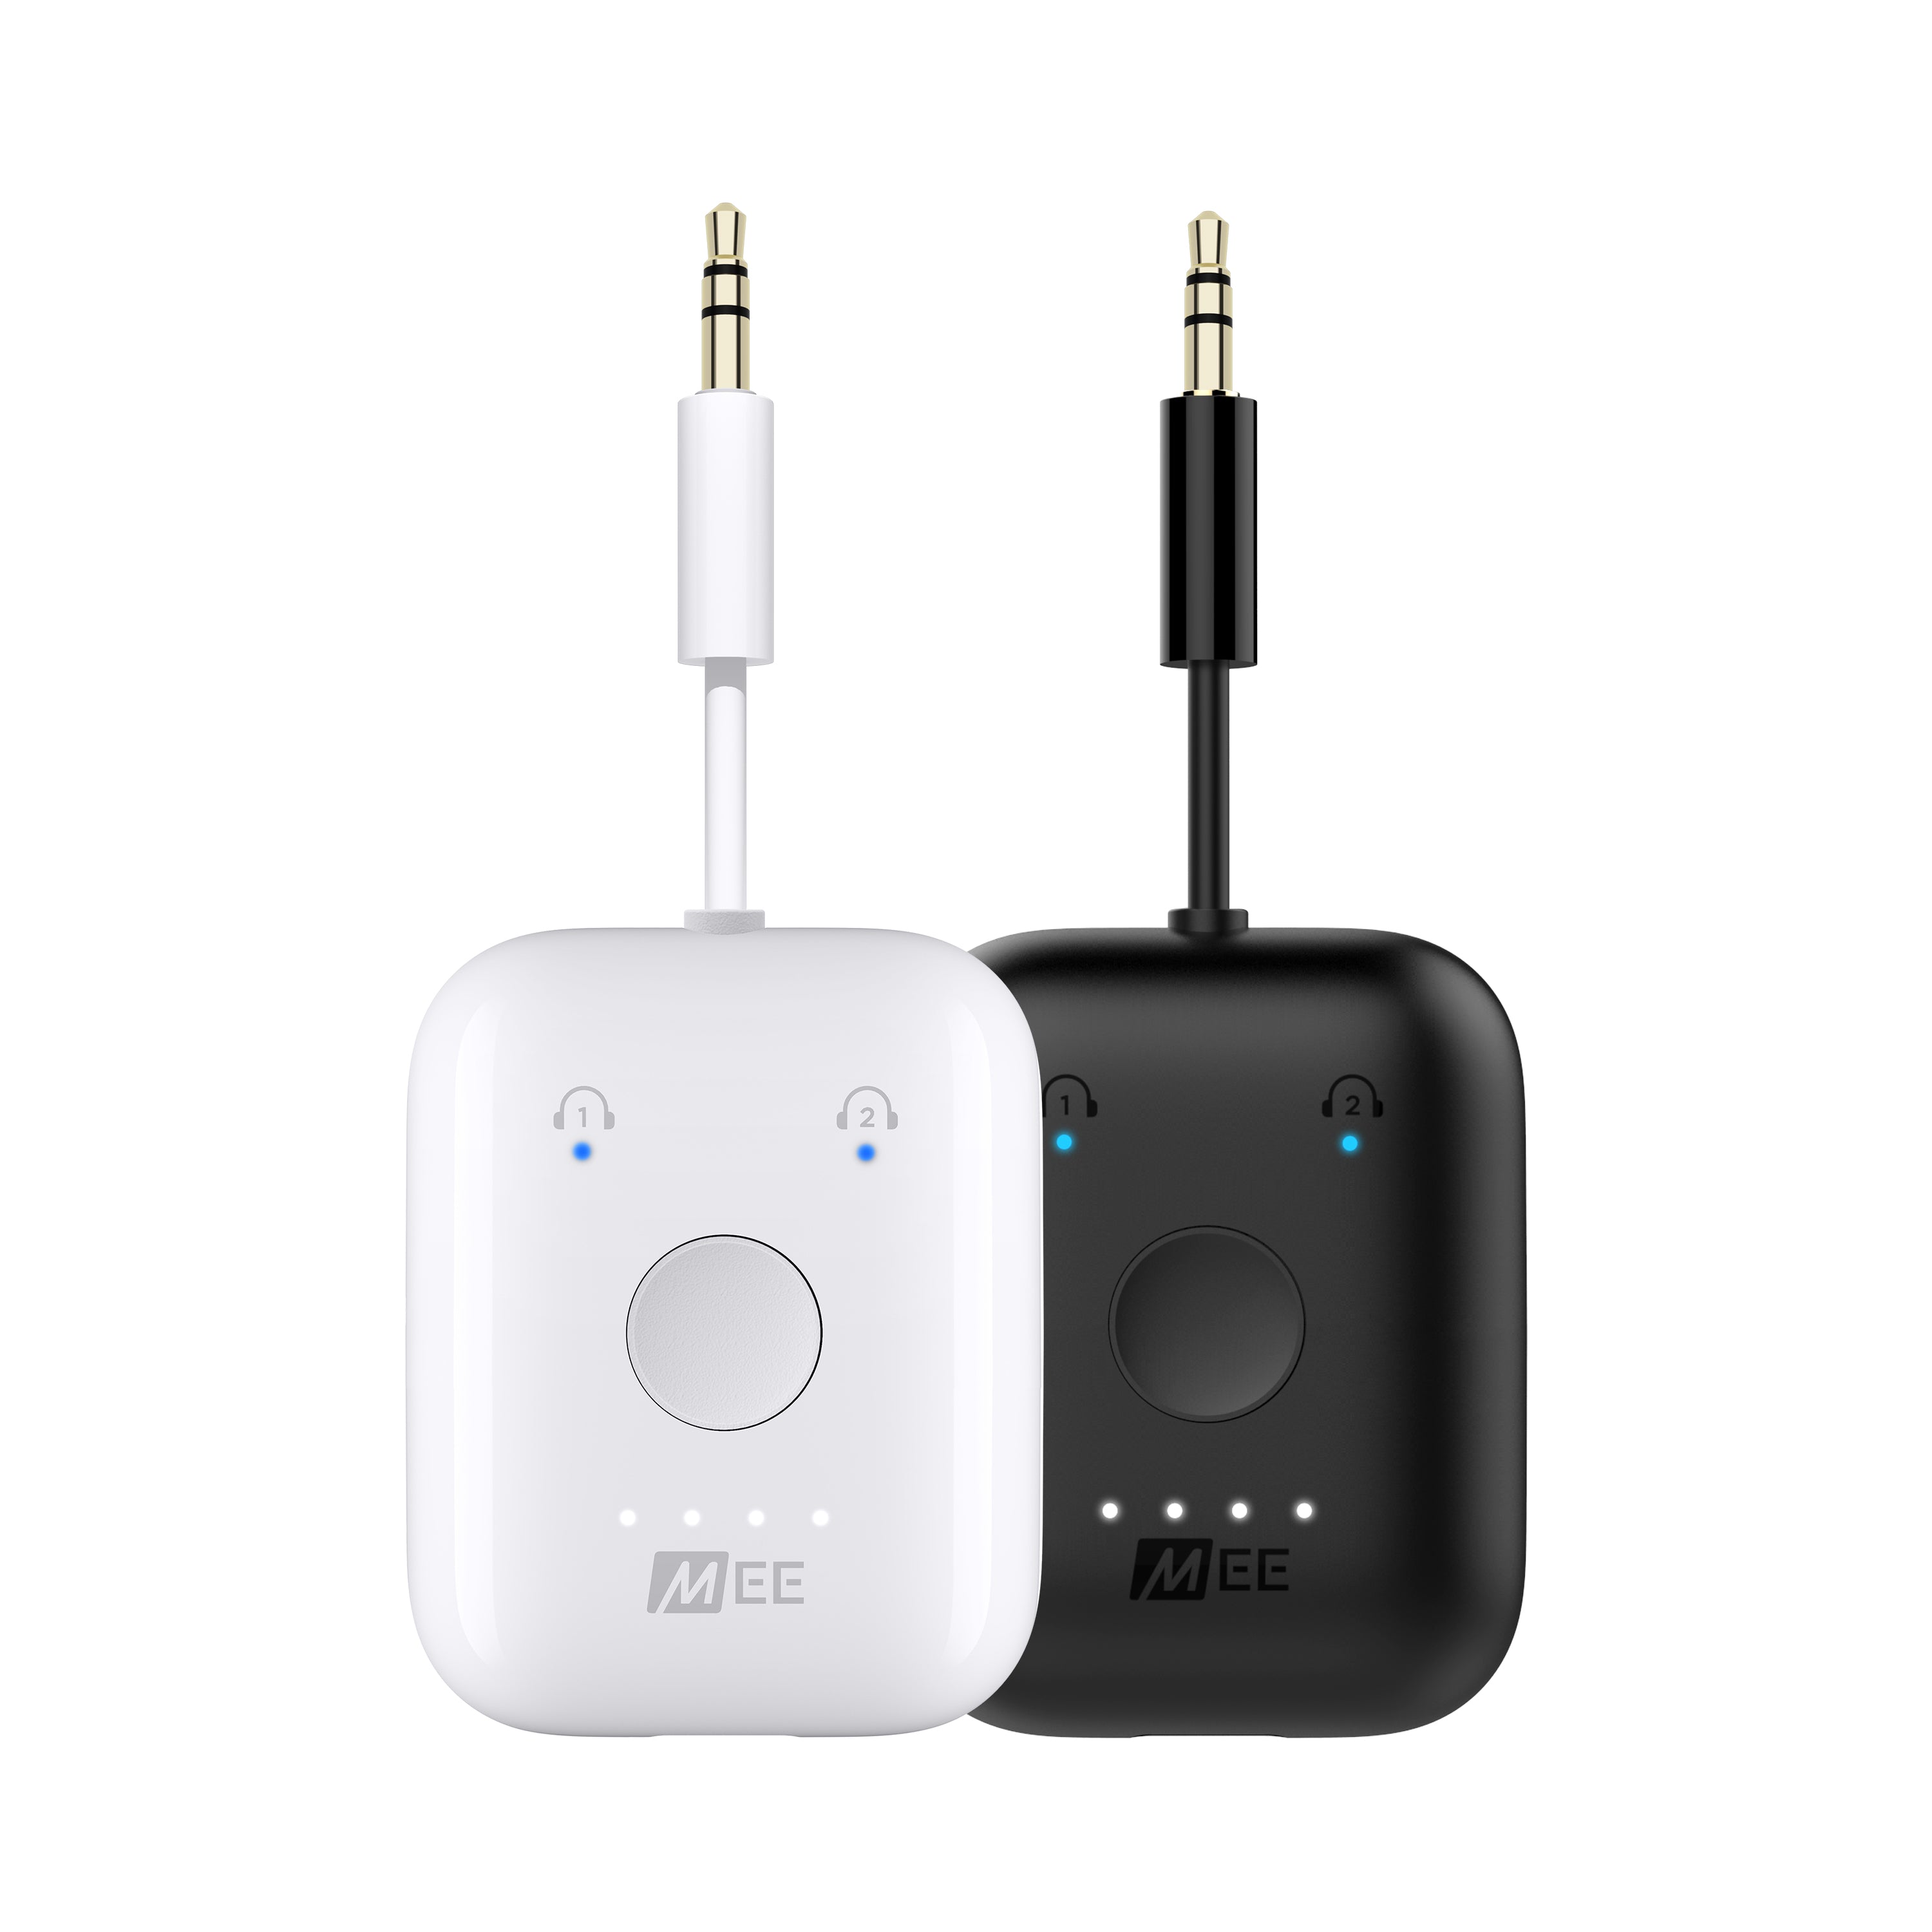 Two bluetooth wireless audio transmitters, one in white and one in black, each featuring a pairing button and led indicators, designed to connect headphones to a device without bluetooth.